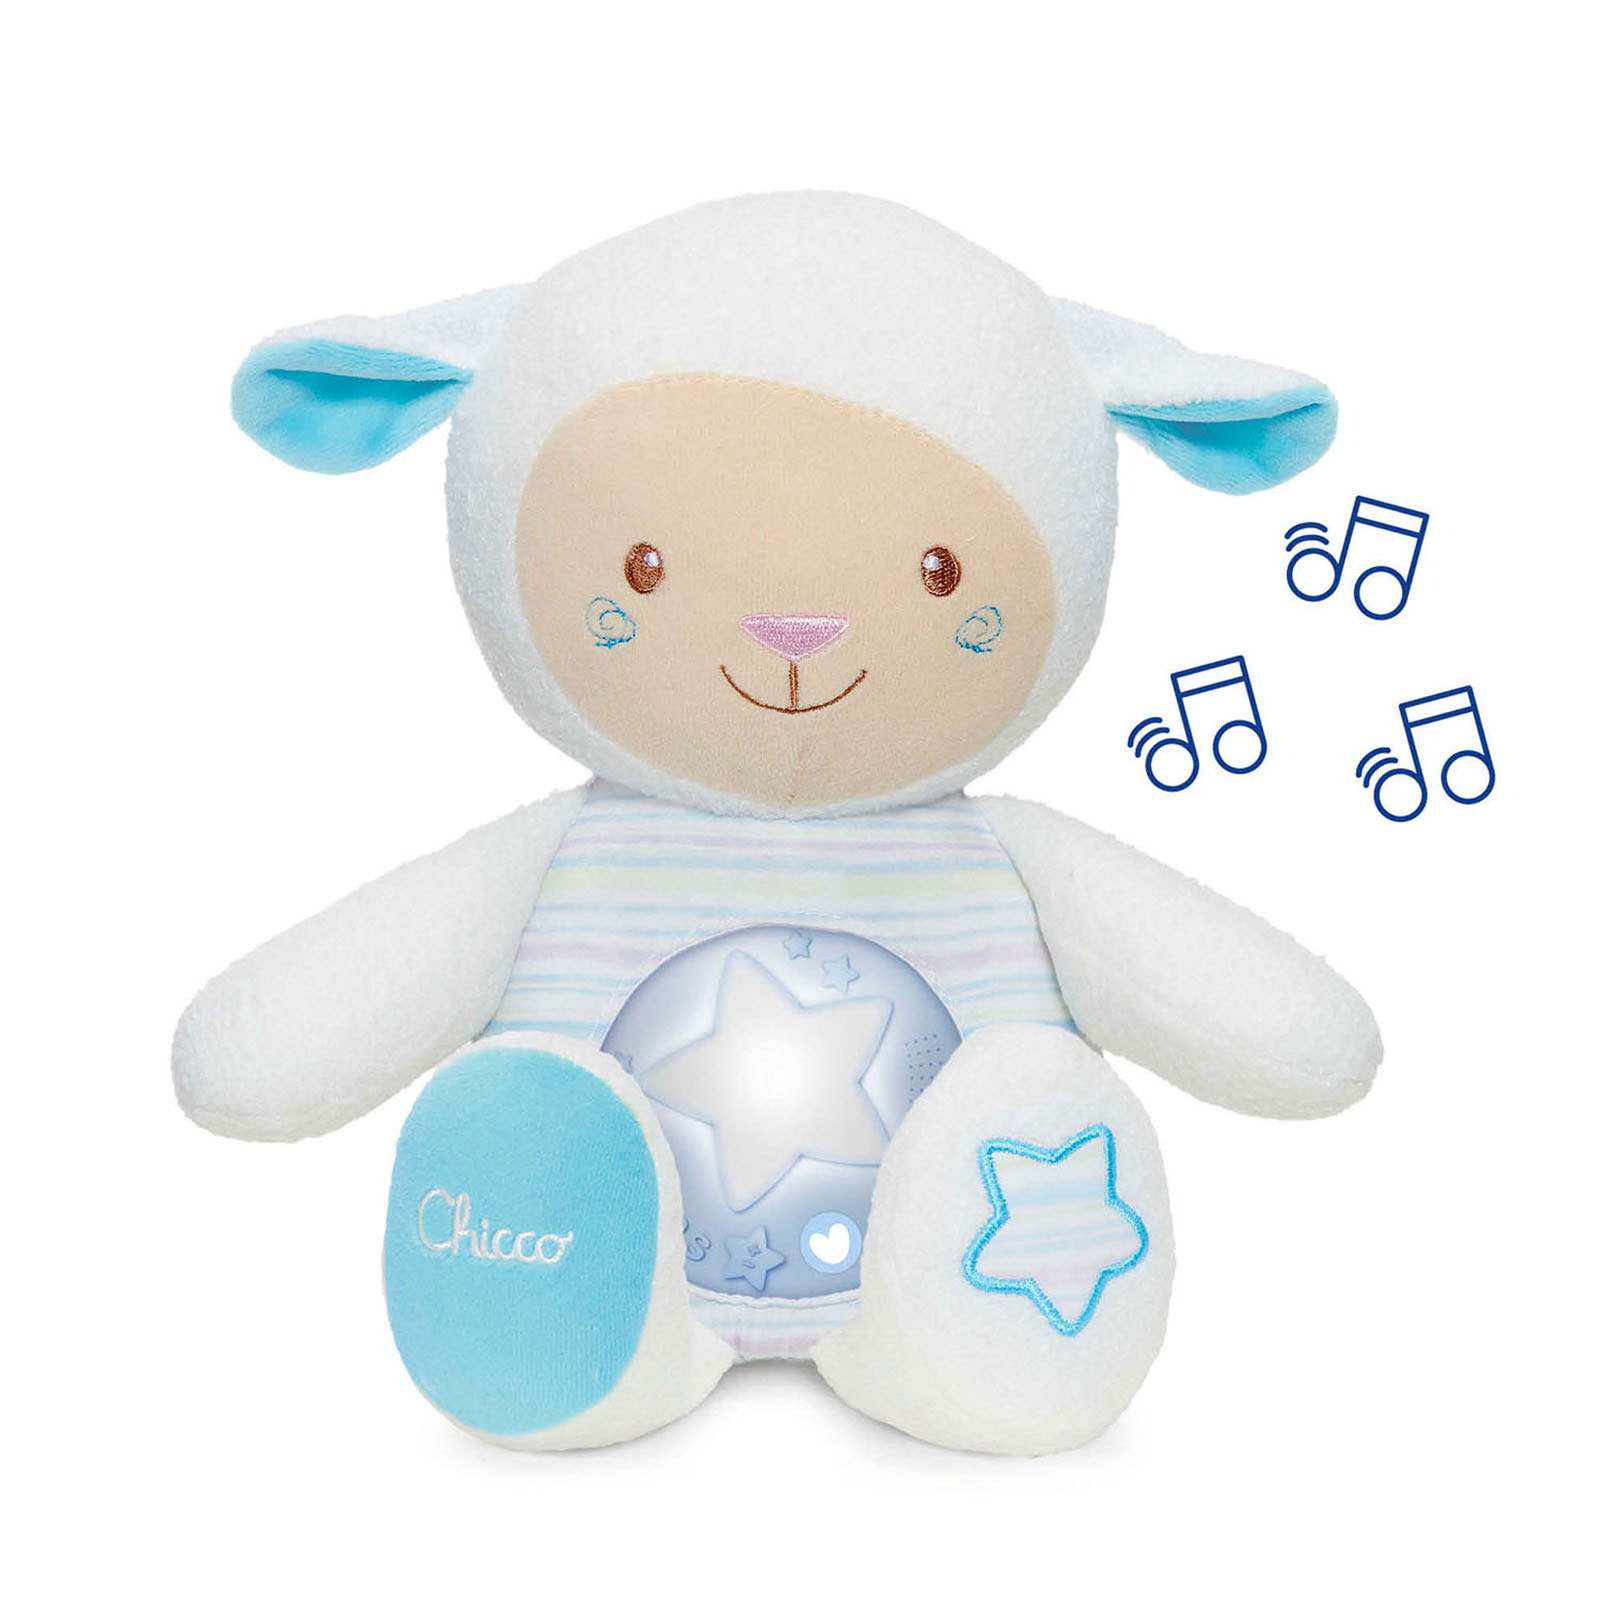 Chicco First Dreams Lullaby Sheep Nightlight with Musical Sounds - Blue & White